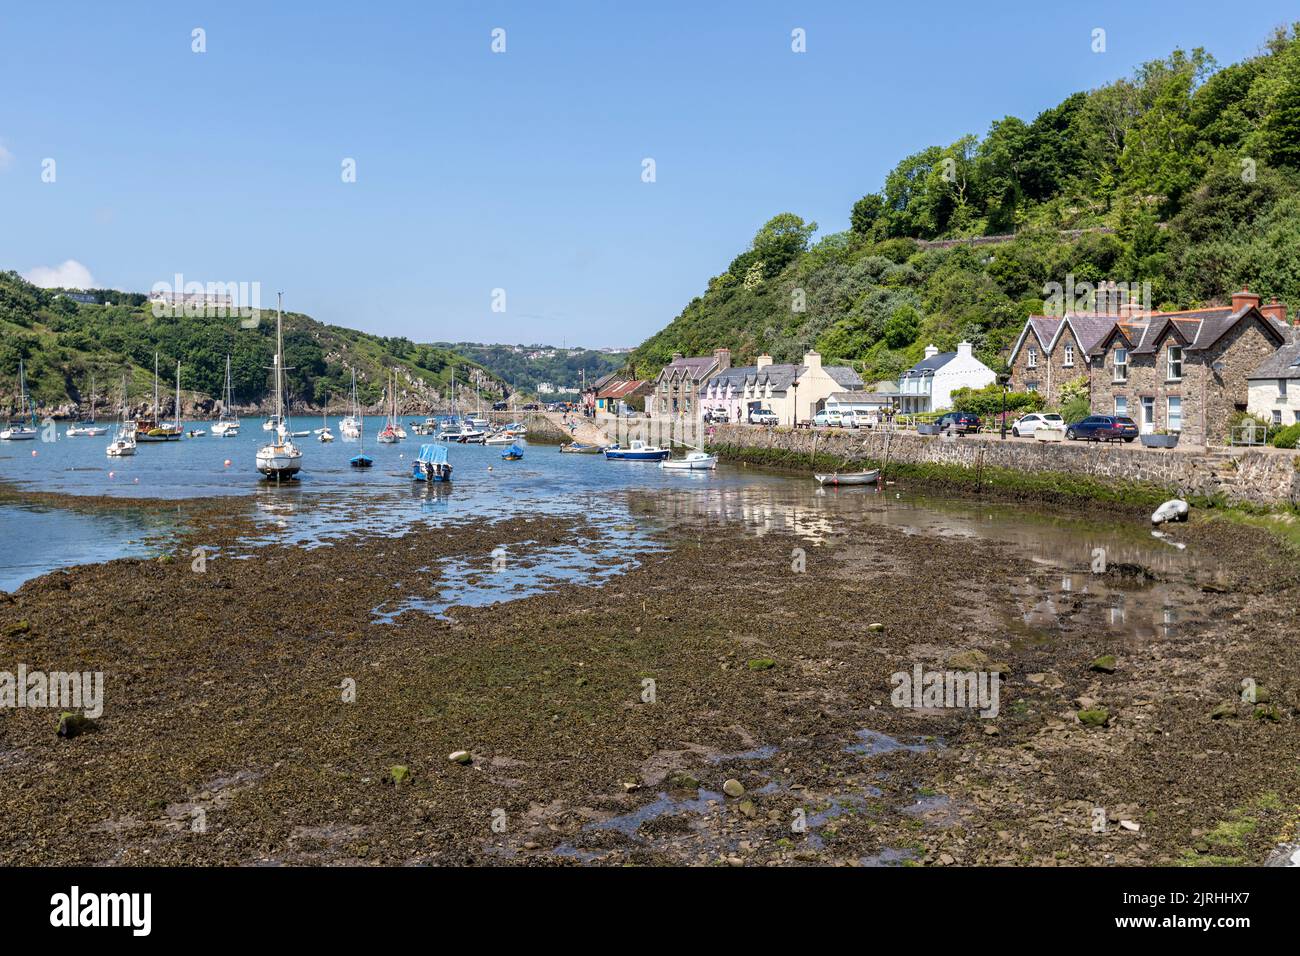 Boats in quay in village of Fishguard, Pembrokeshire, Wales, UK Stock Photo